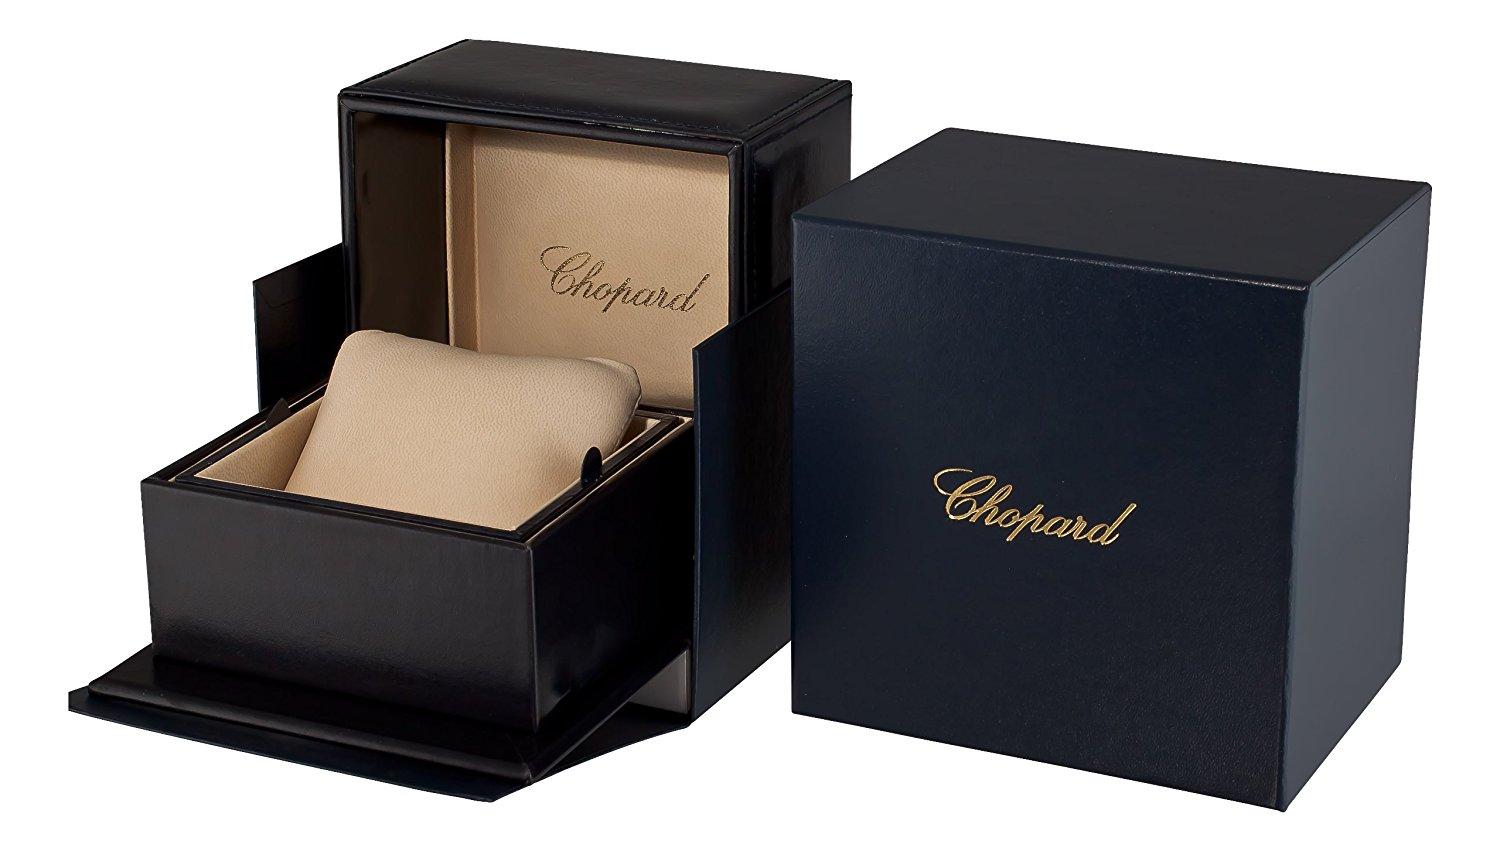 chopard heart ring price